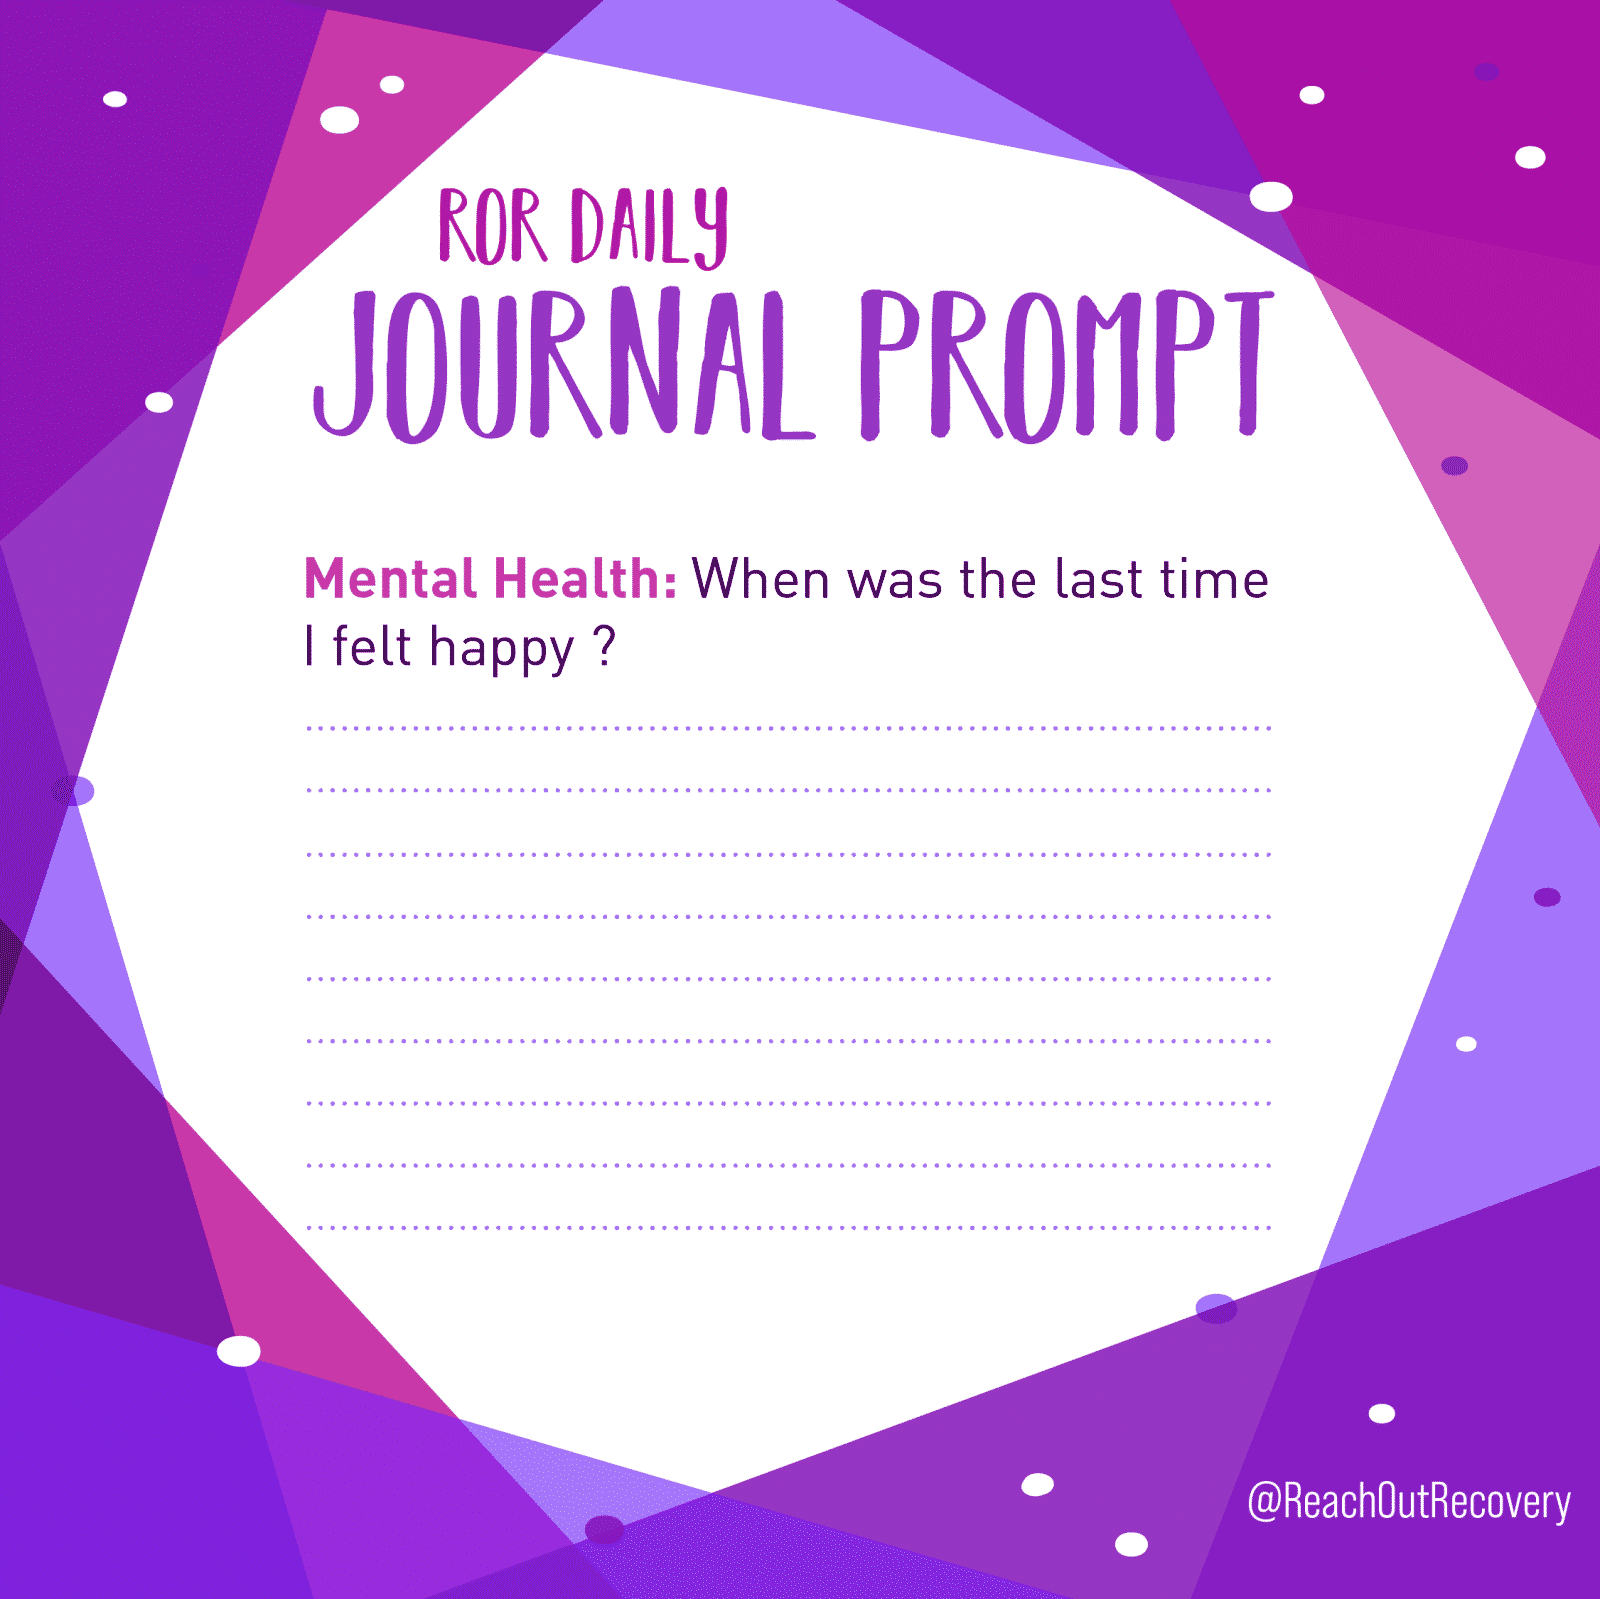 Journal prompt happiness: launch your creativity